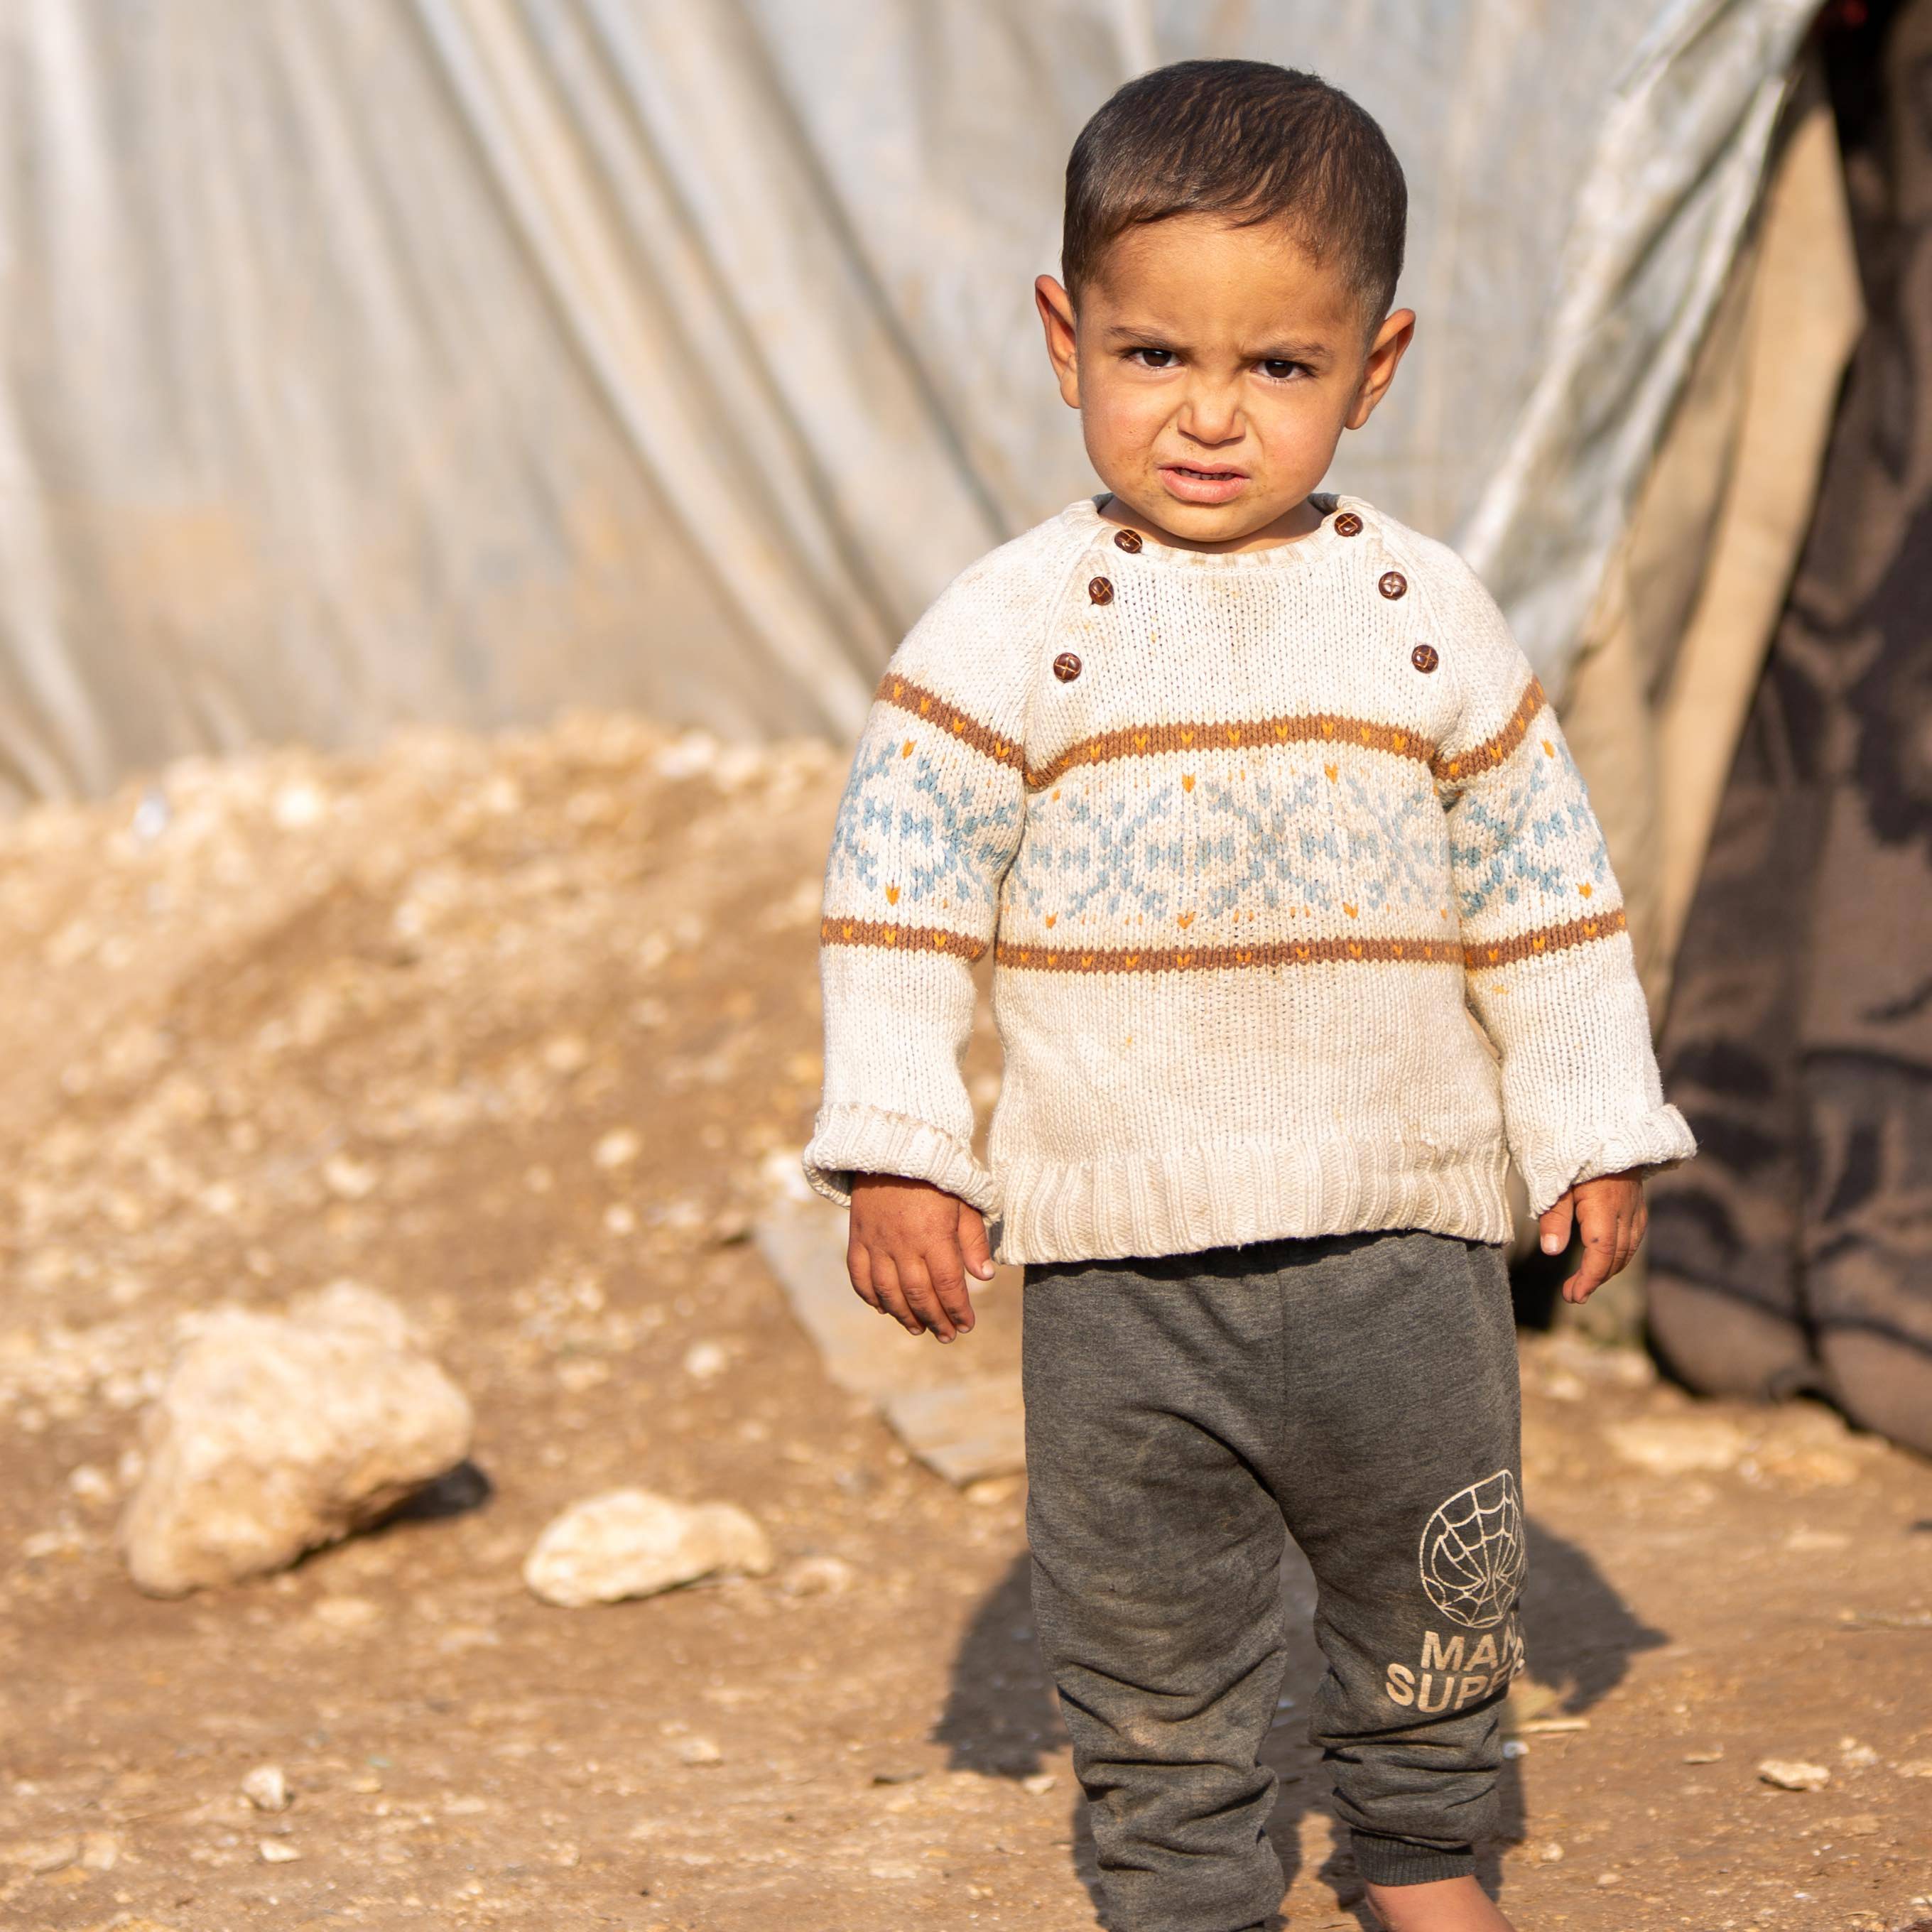 A young Syrian refugee 